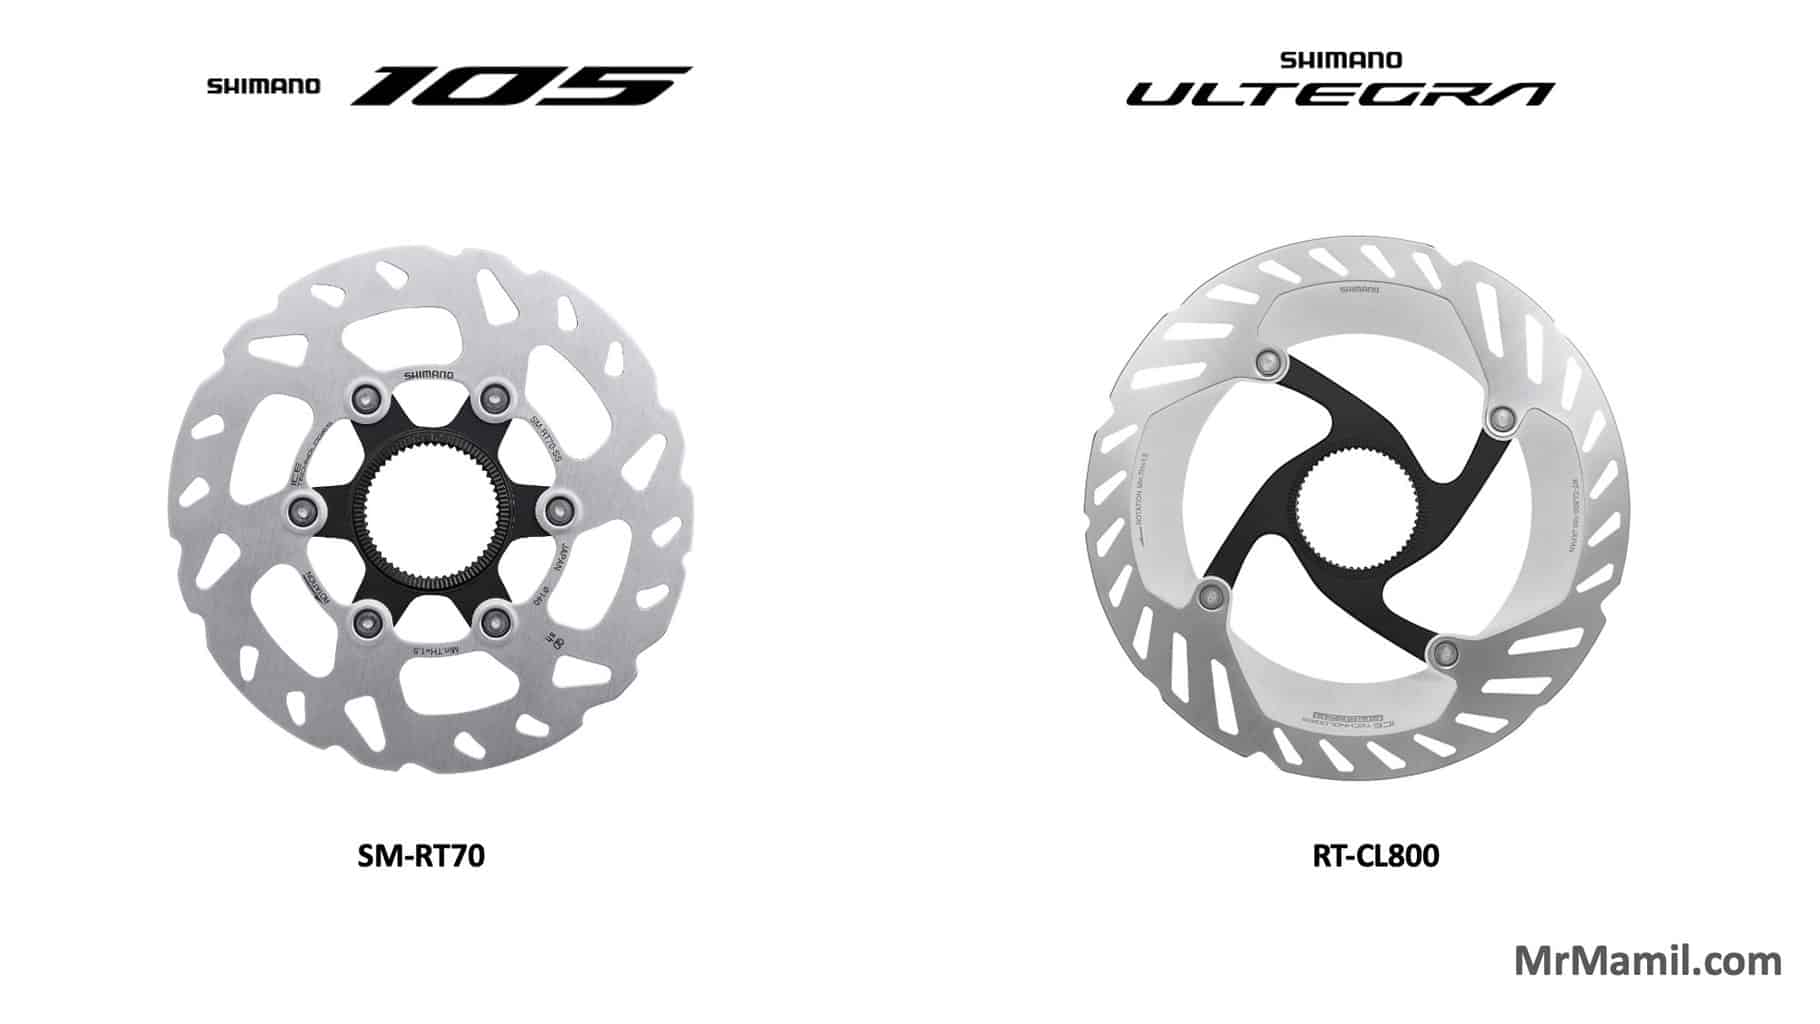 Side-by-side comparison of Shimano disc brake rotors On the left, a Shimano 105 rotor labeled SM-RT70. On the right, a Shimano Ultegra rotor labeled RT-CL800.